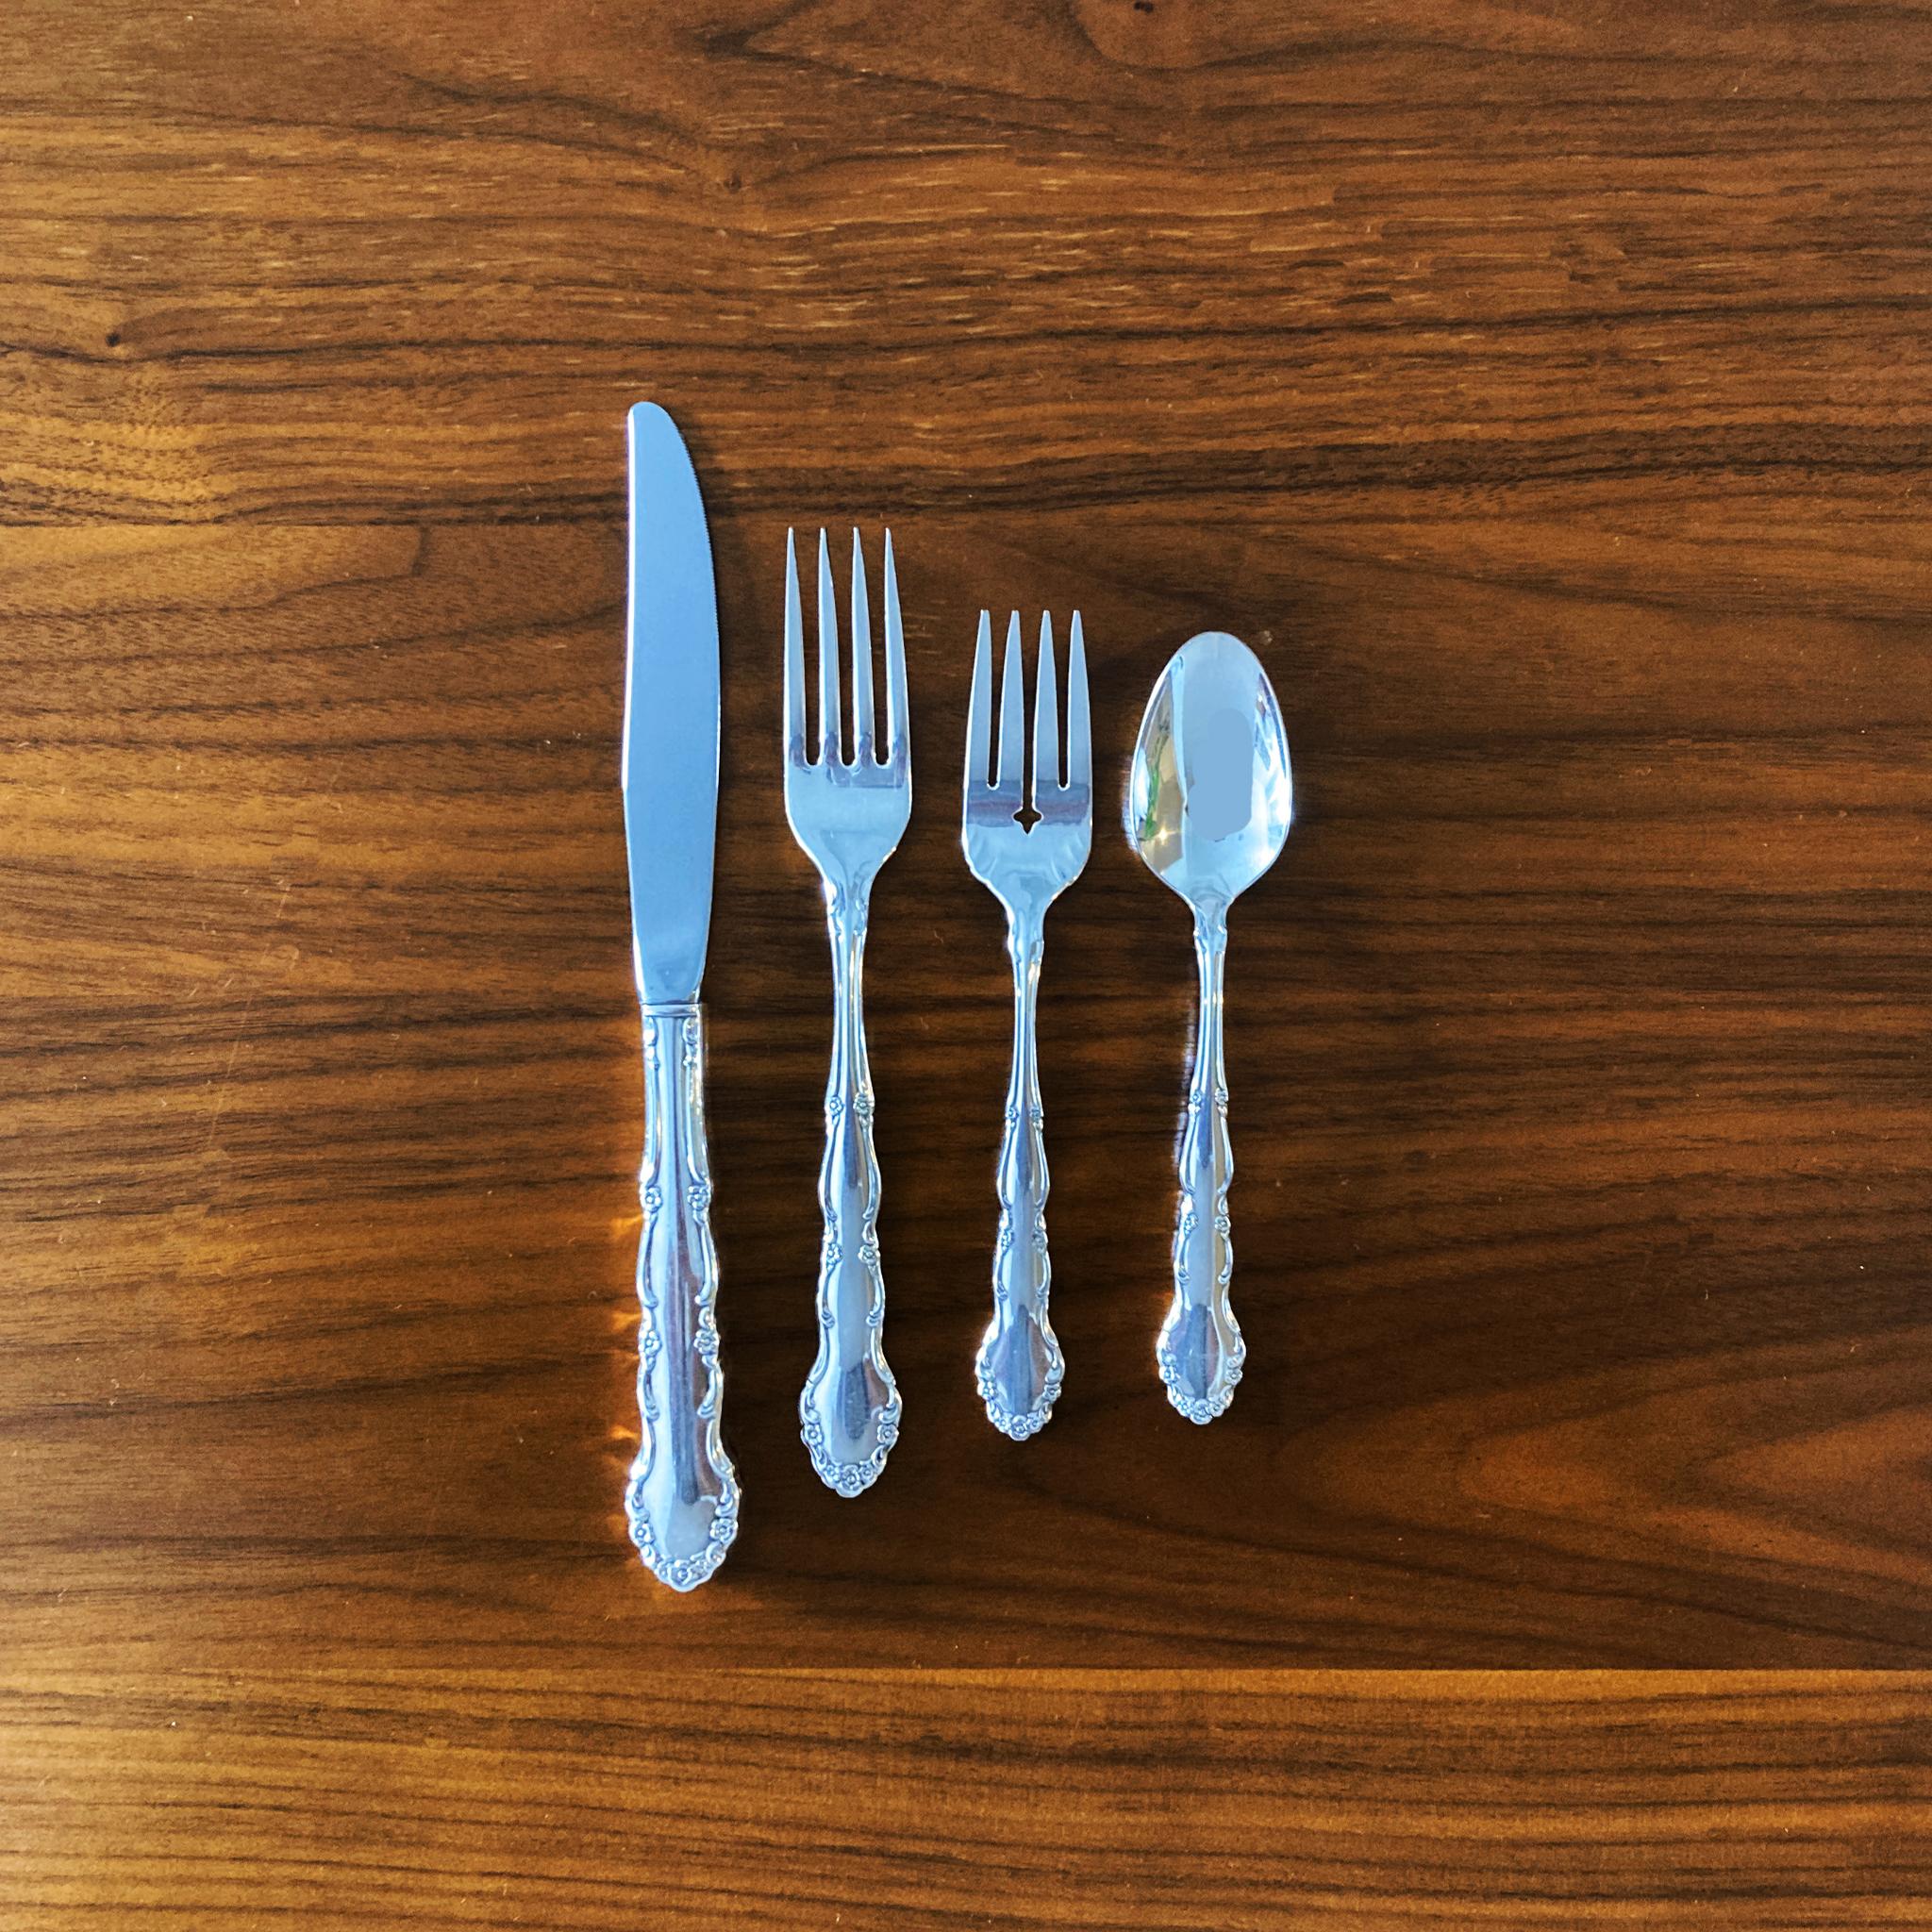 Oneida Ltd, formerly Oneida Community, was established in Oneida, New York in 1848 by a utopian commune. Oneida started production of silver-plated flatware and hollow-ware in 1899. Oneida purchased the Wm A. Rogers company in 1929. The Wm A. Rogers